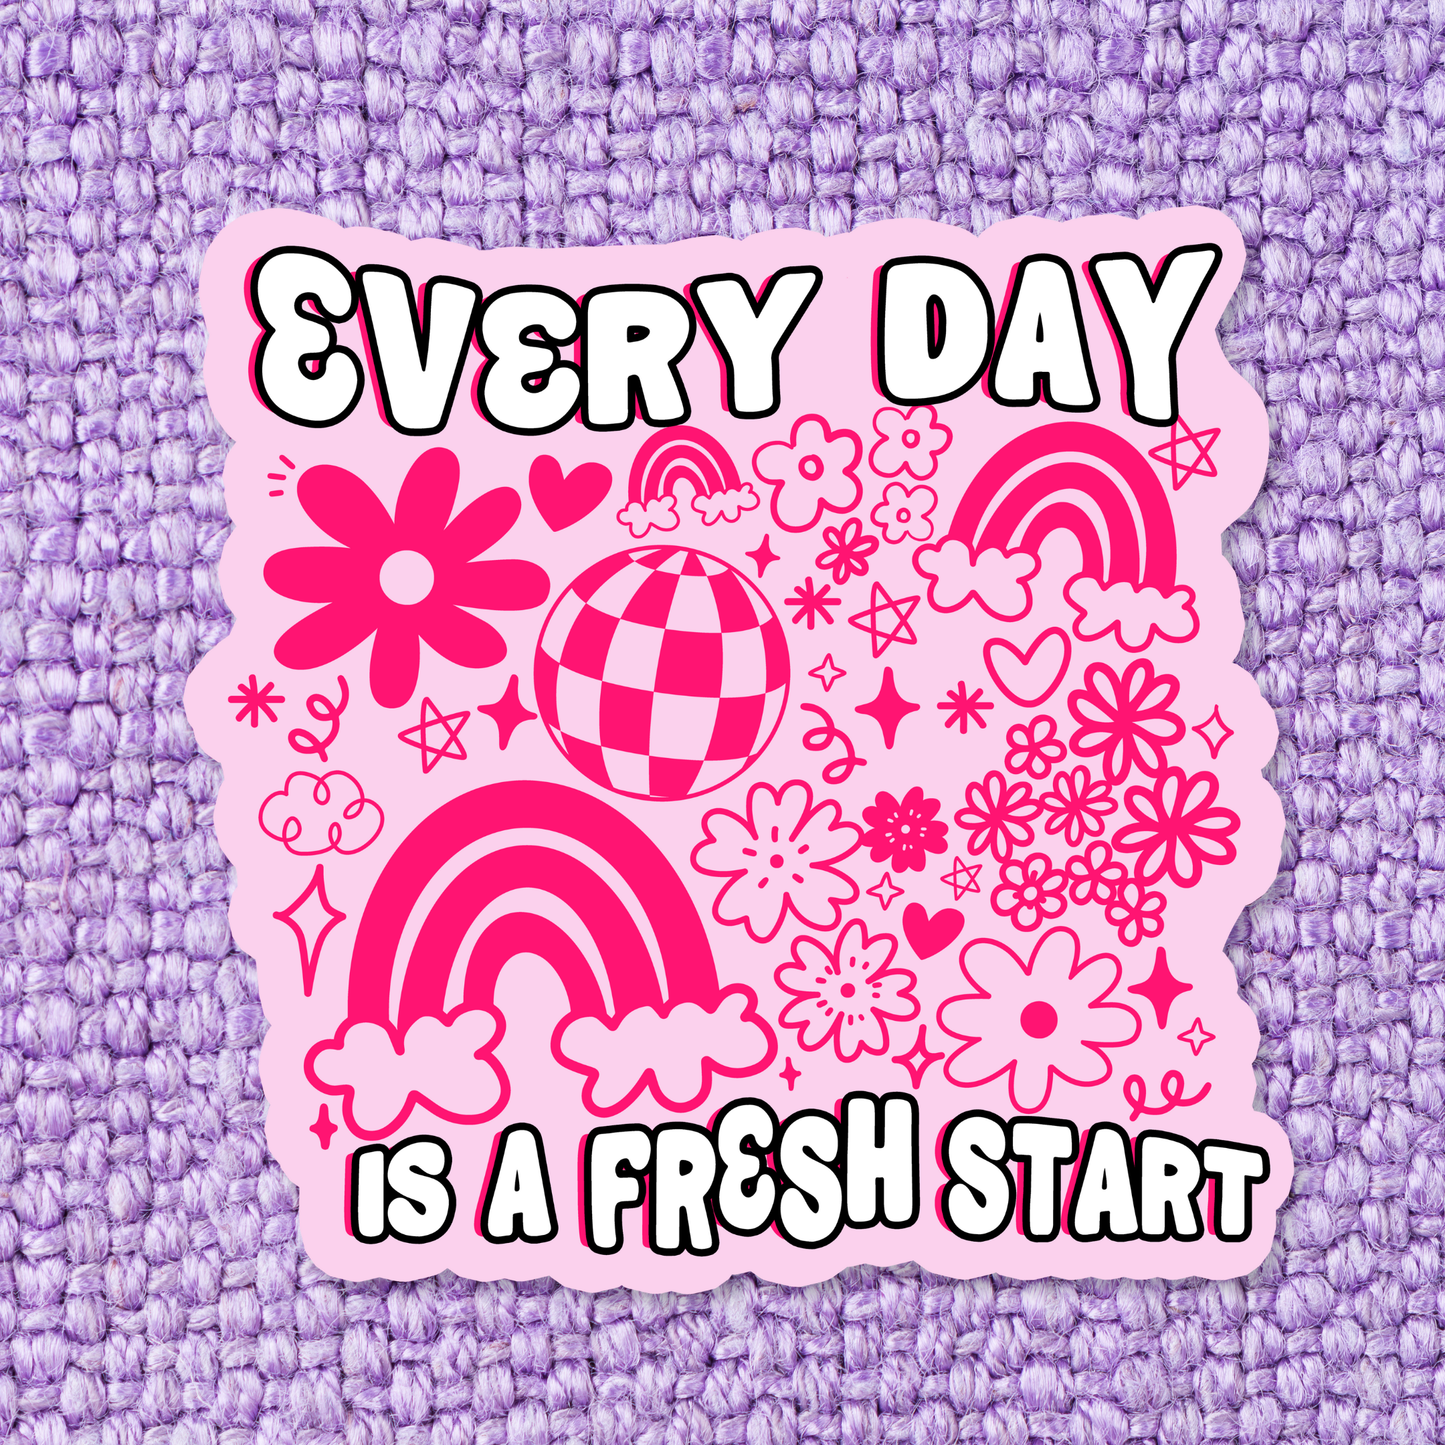 Every day is a Fresh Start